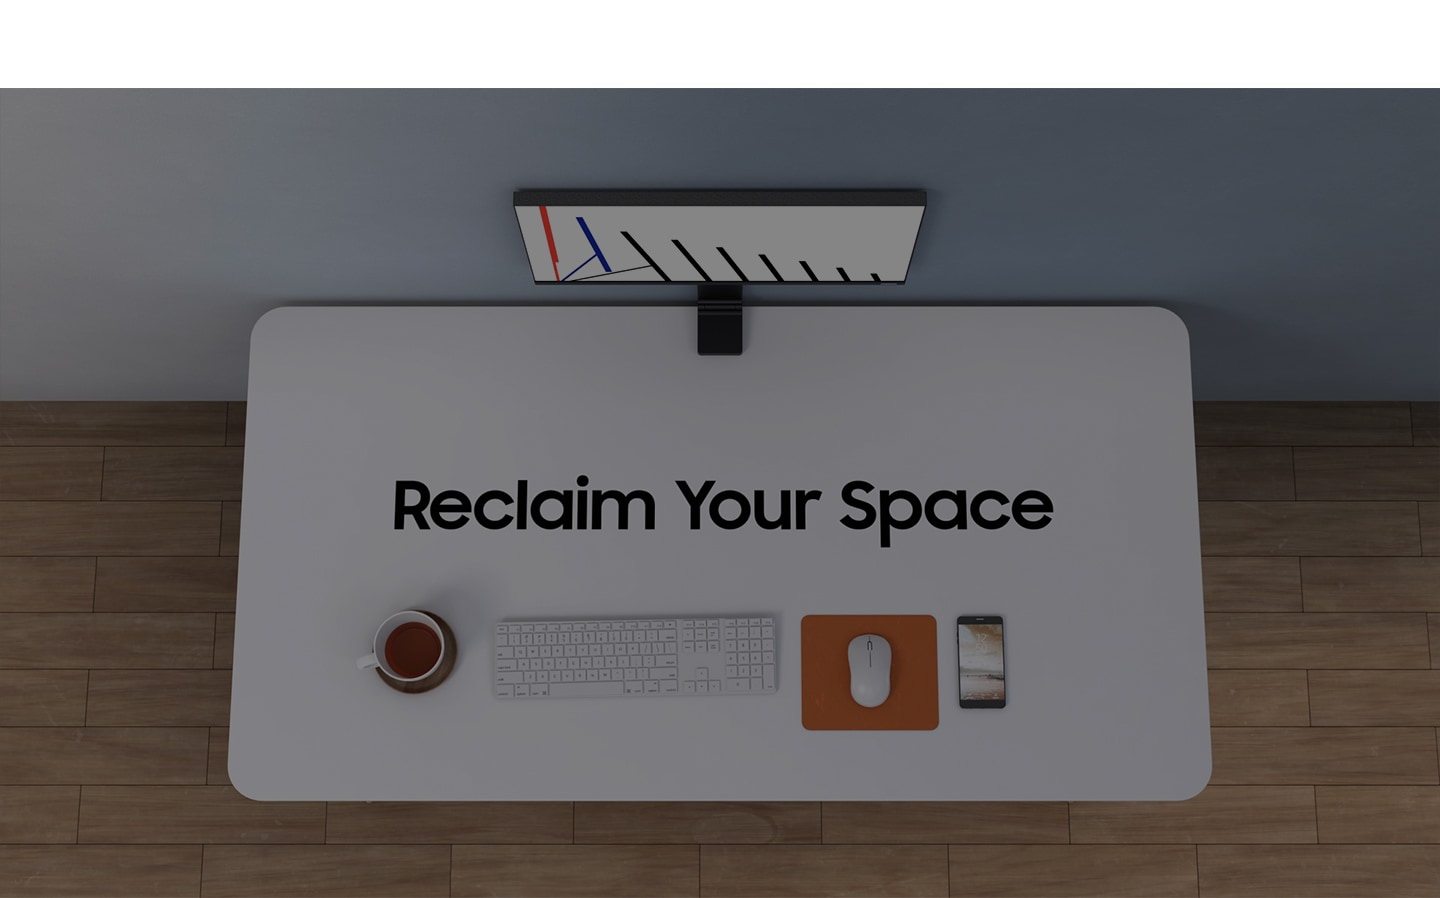  Reclaim Your Space